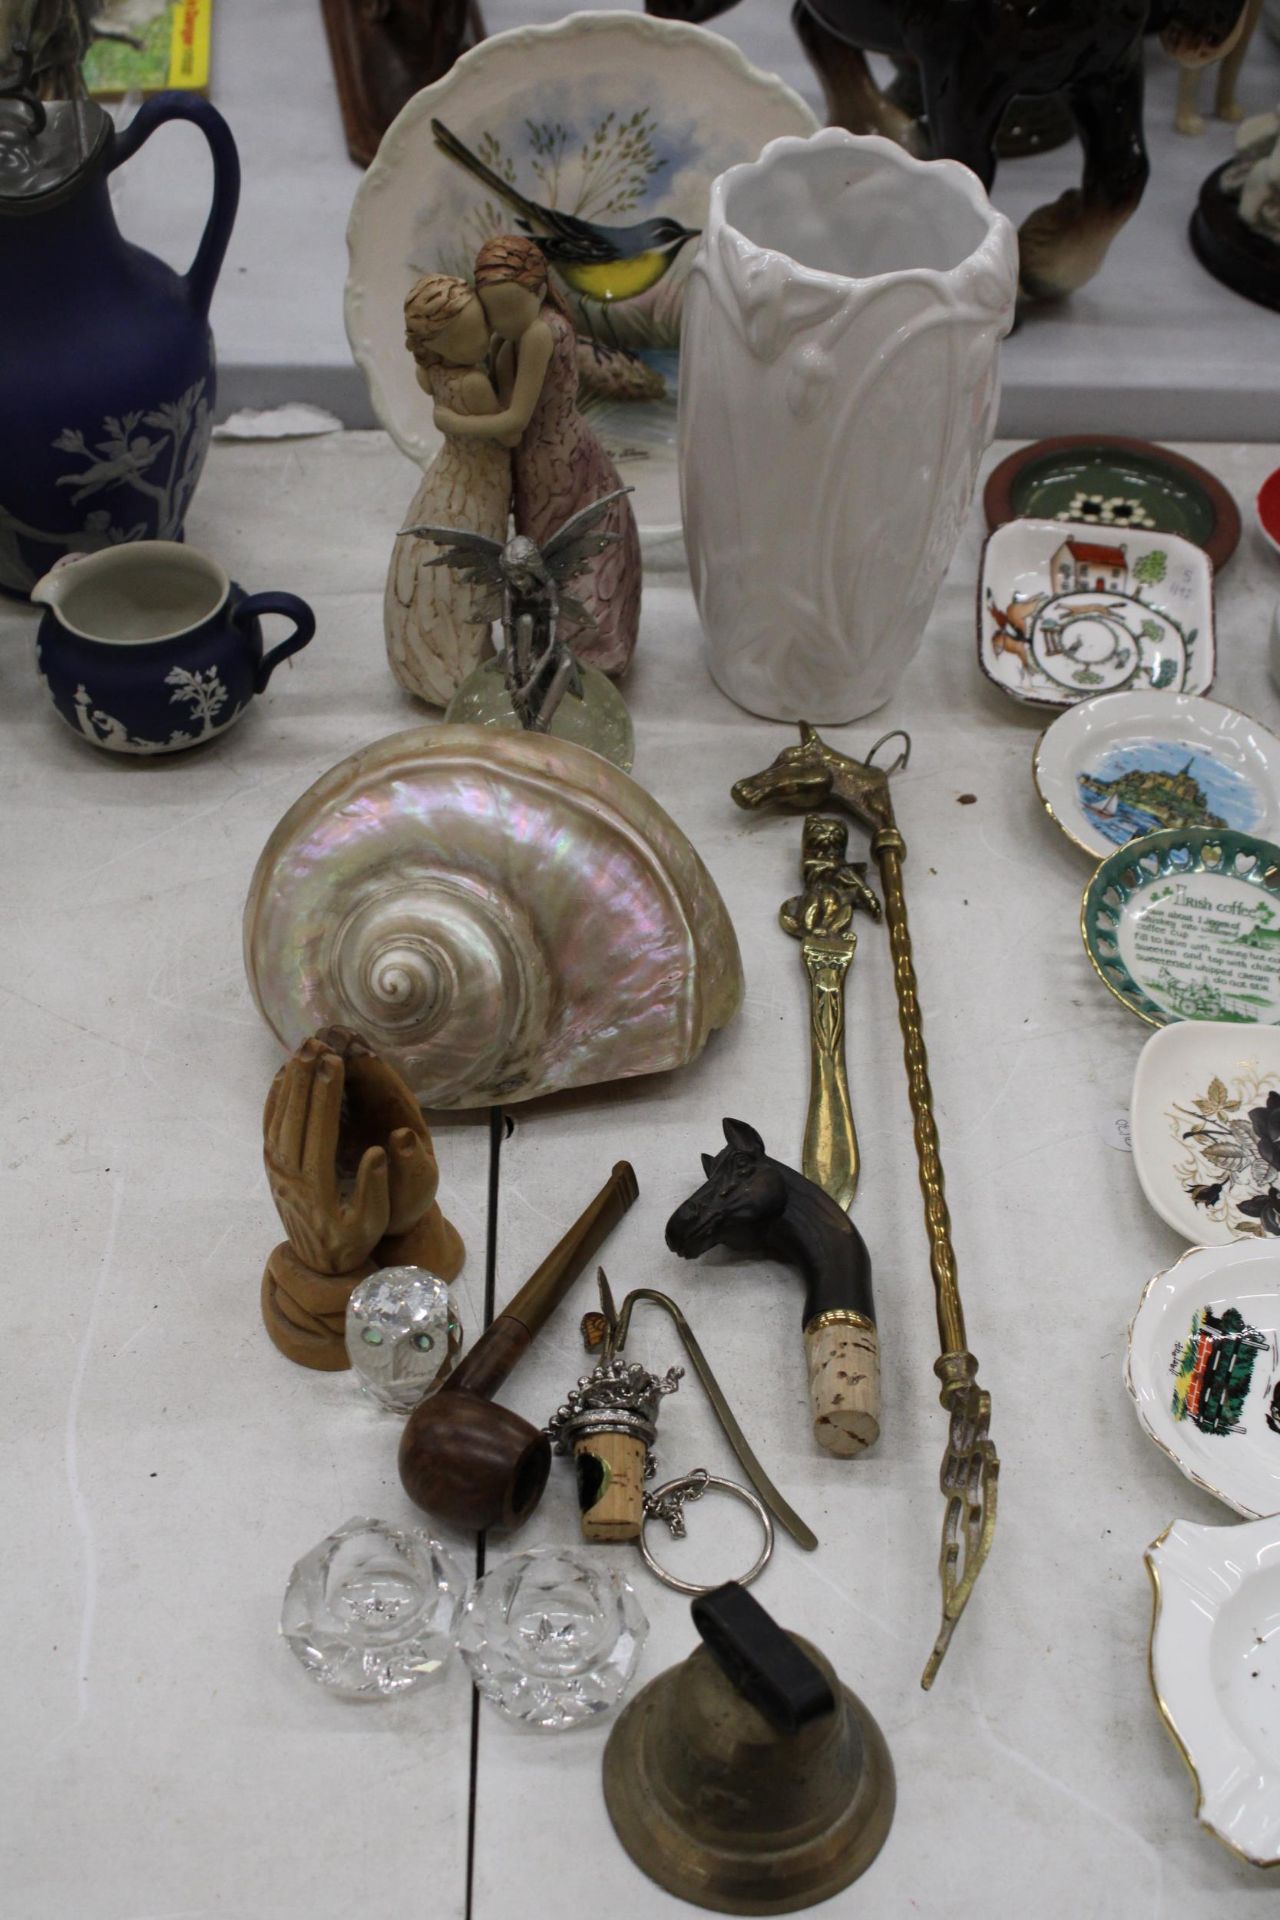 A MIXED LOT TO INCLUDE A LARGE IRIDESCENT SHELL, PRAYING HANDS, BRASSWARE, BOTTLE STOPPERS, FIGURES,